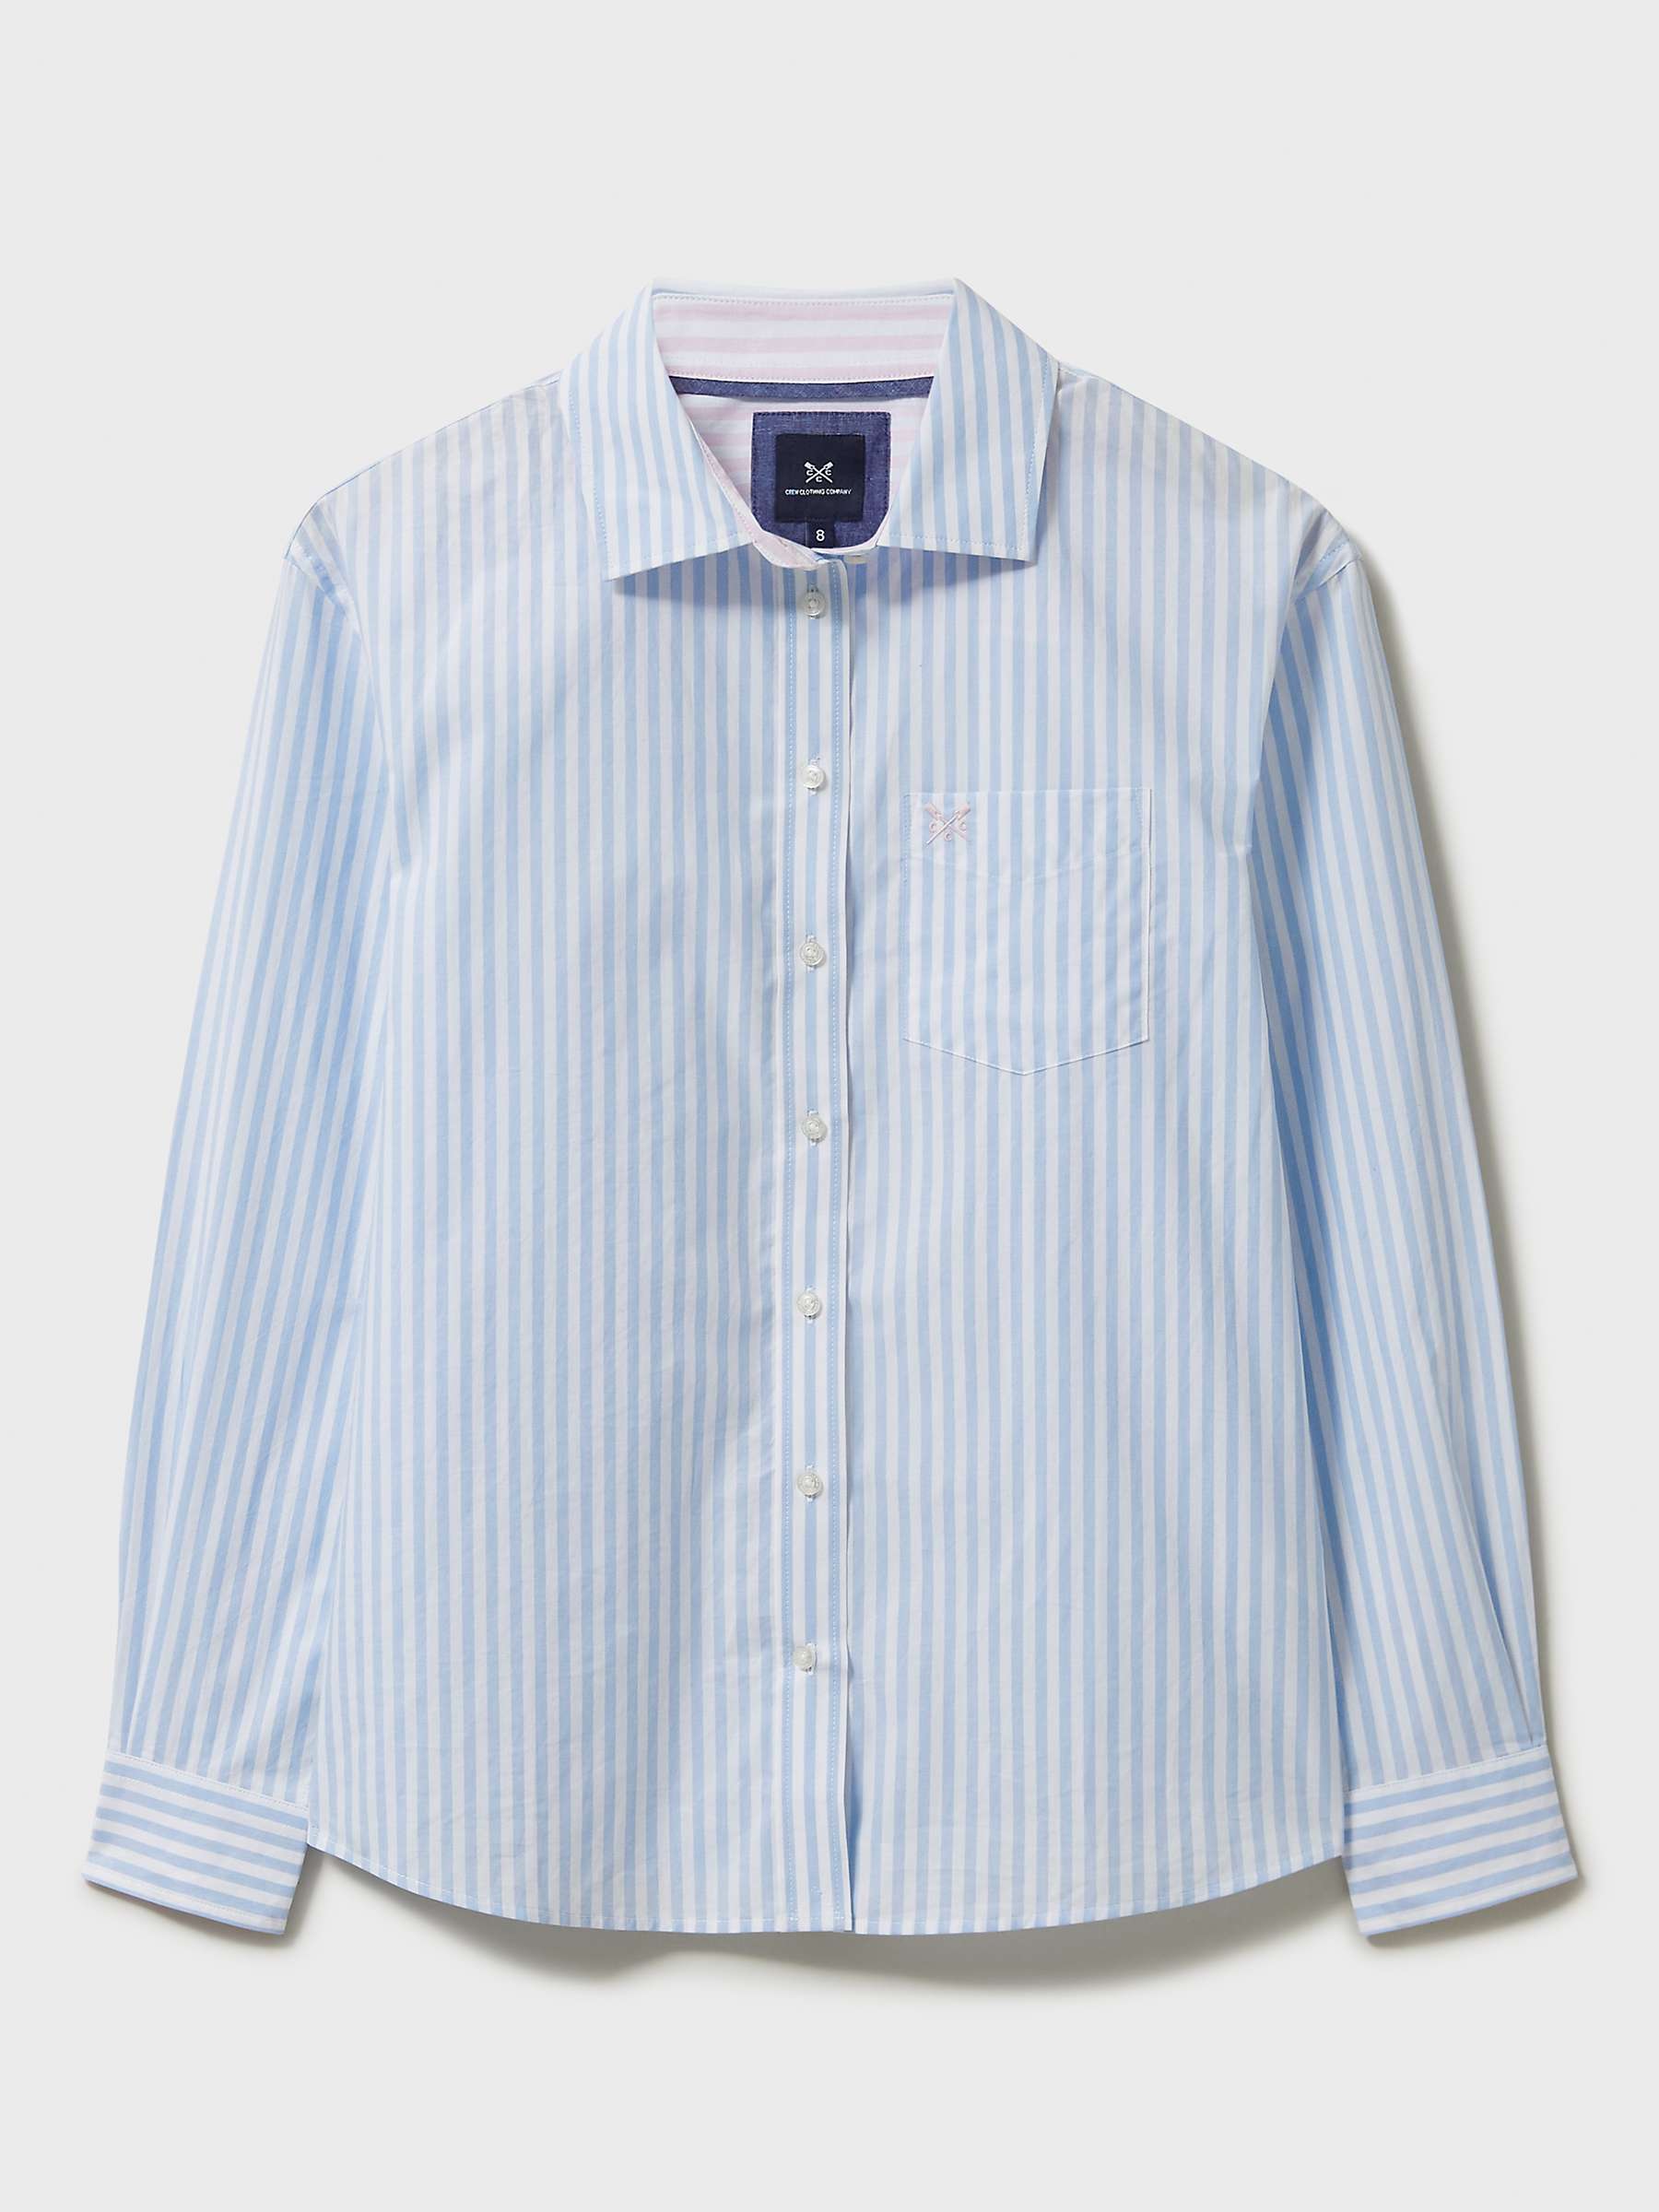 Buy Crew Clothing Relaxed Fit Stripe Shirt, Blue/Multi Online at johnlewis.com